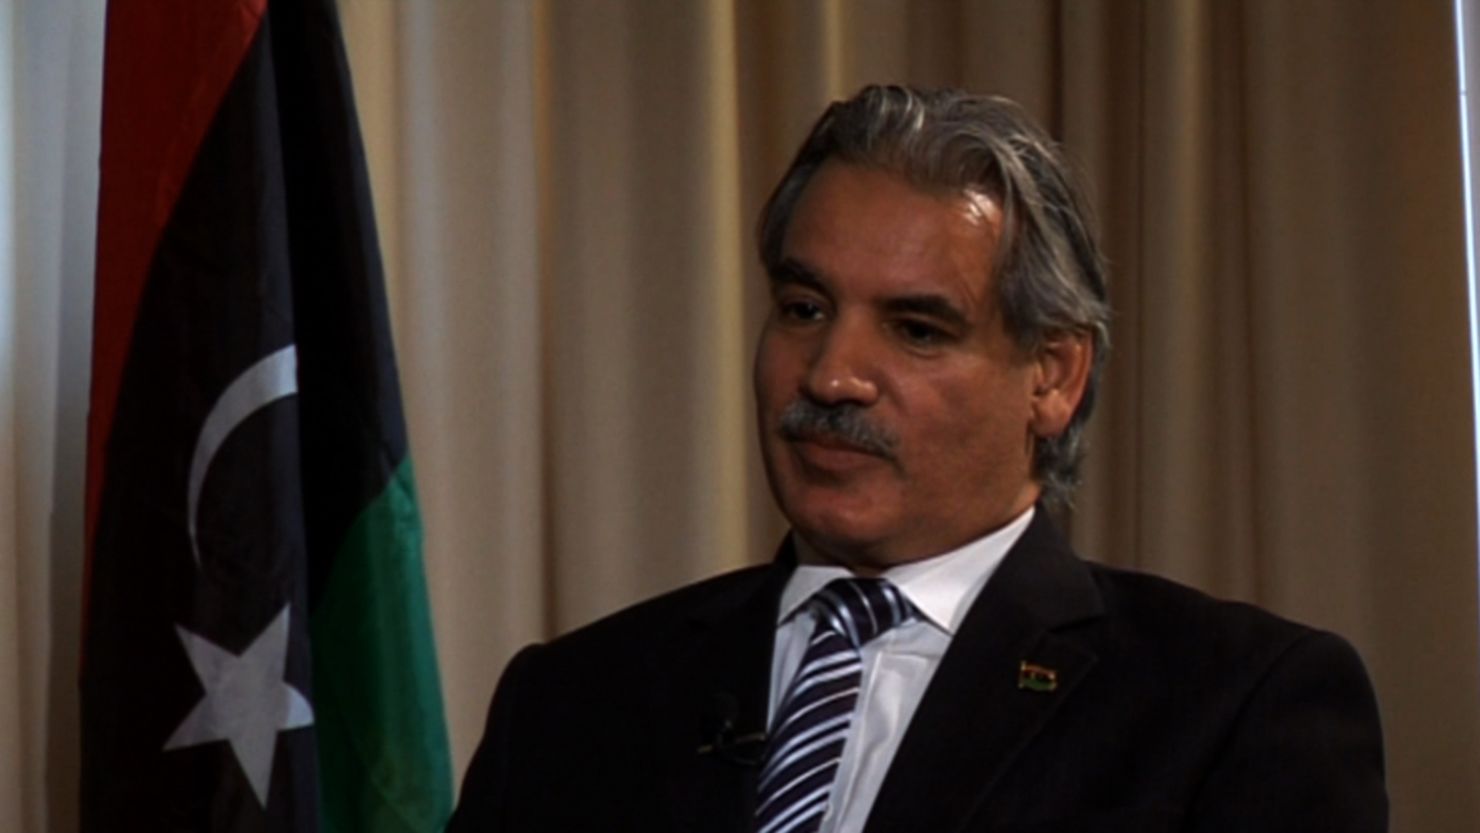 Issa Tuwegiar, the Libyan Minister of Planning talks to CNN about the new path Libya faces after deposing Gaddafi